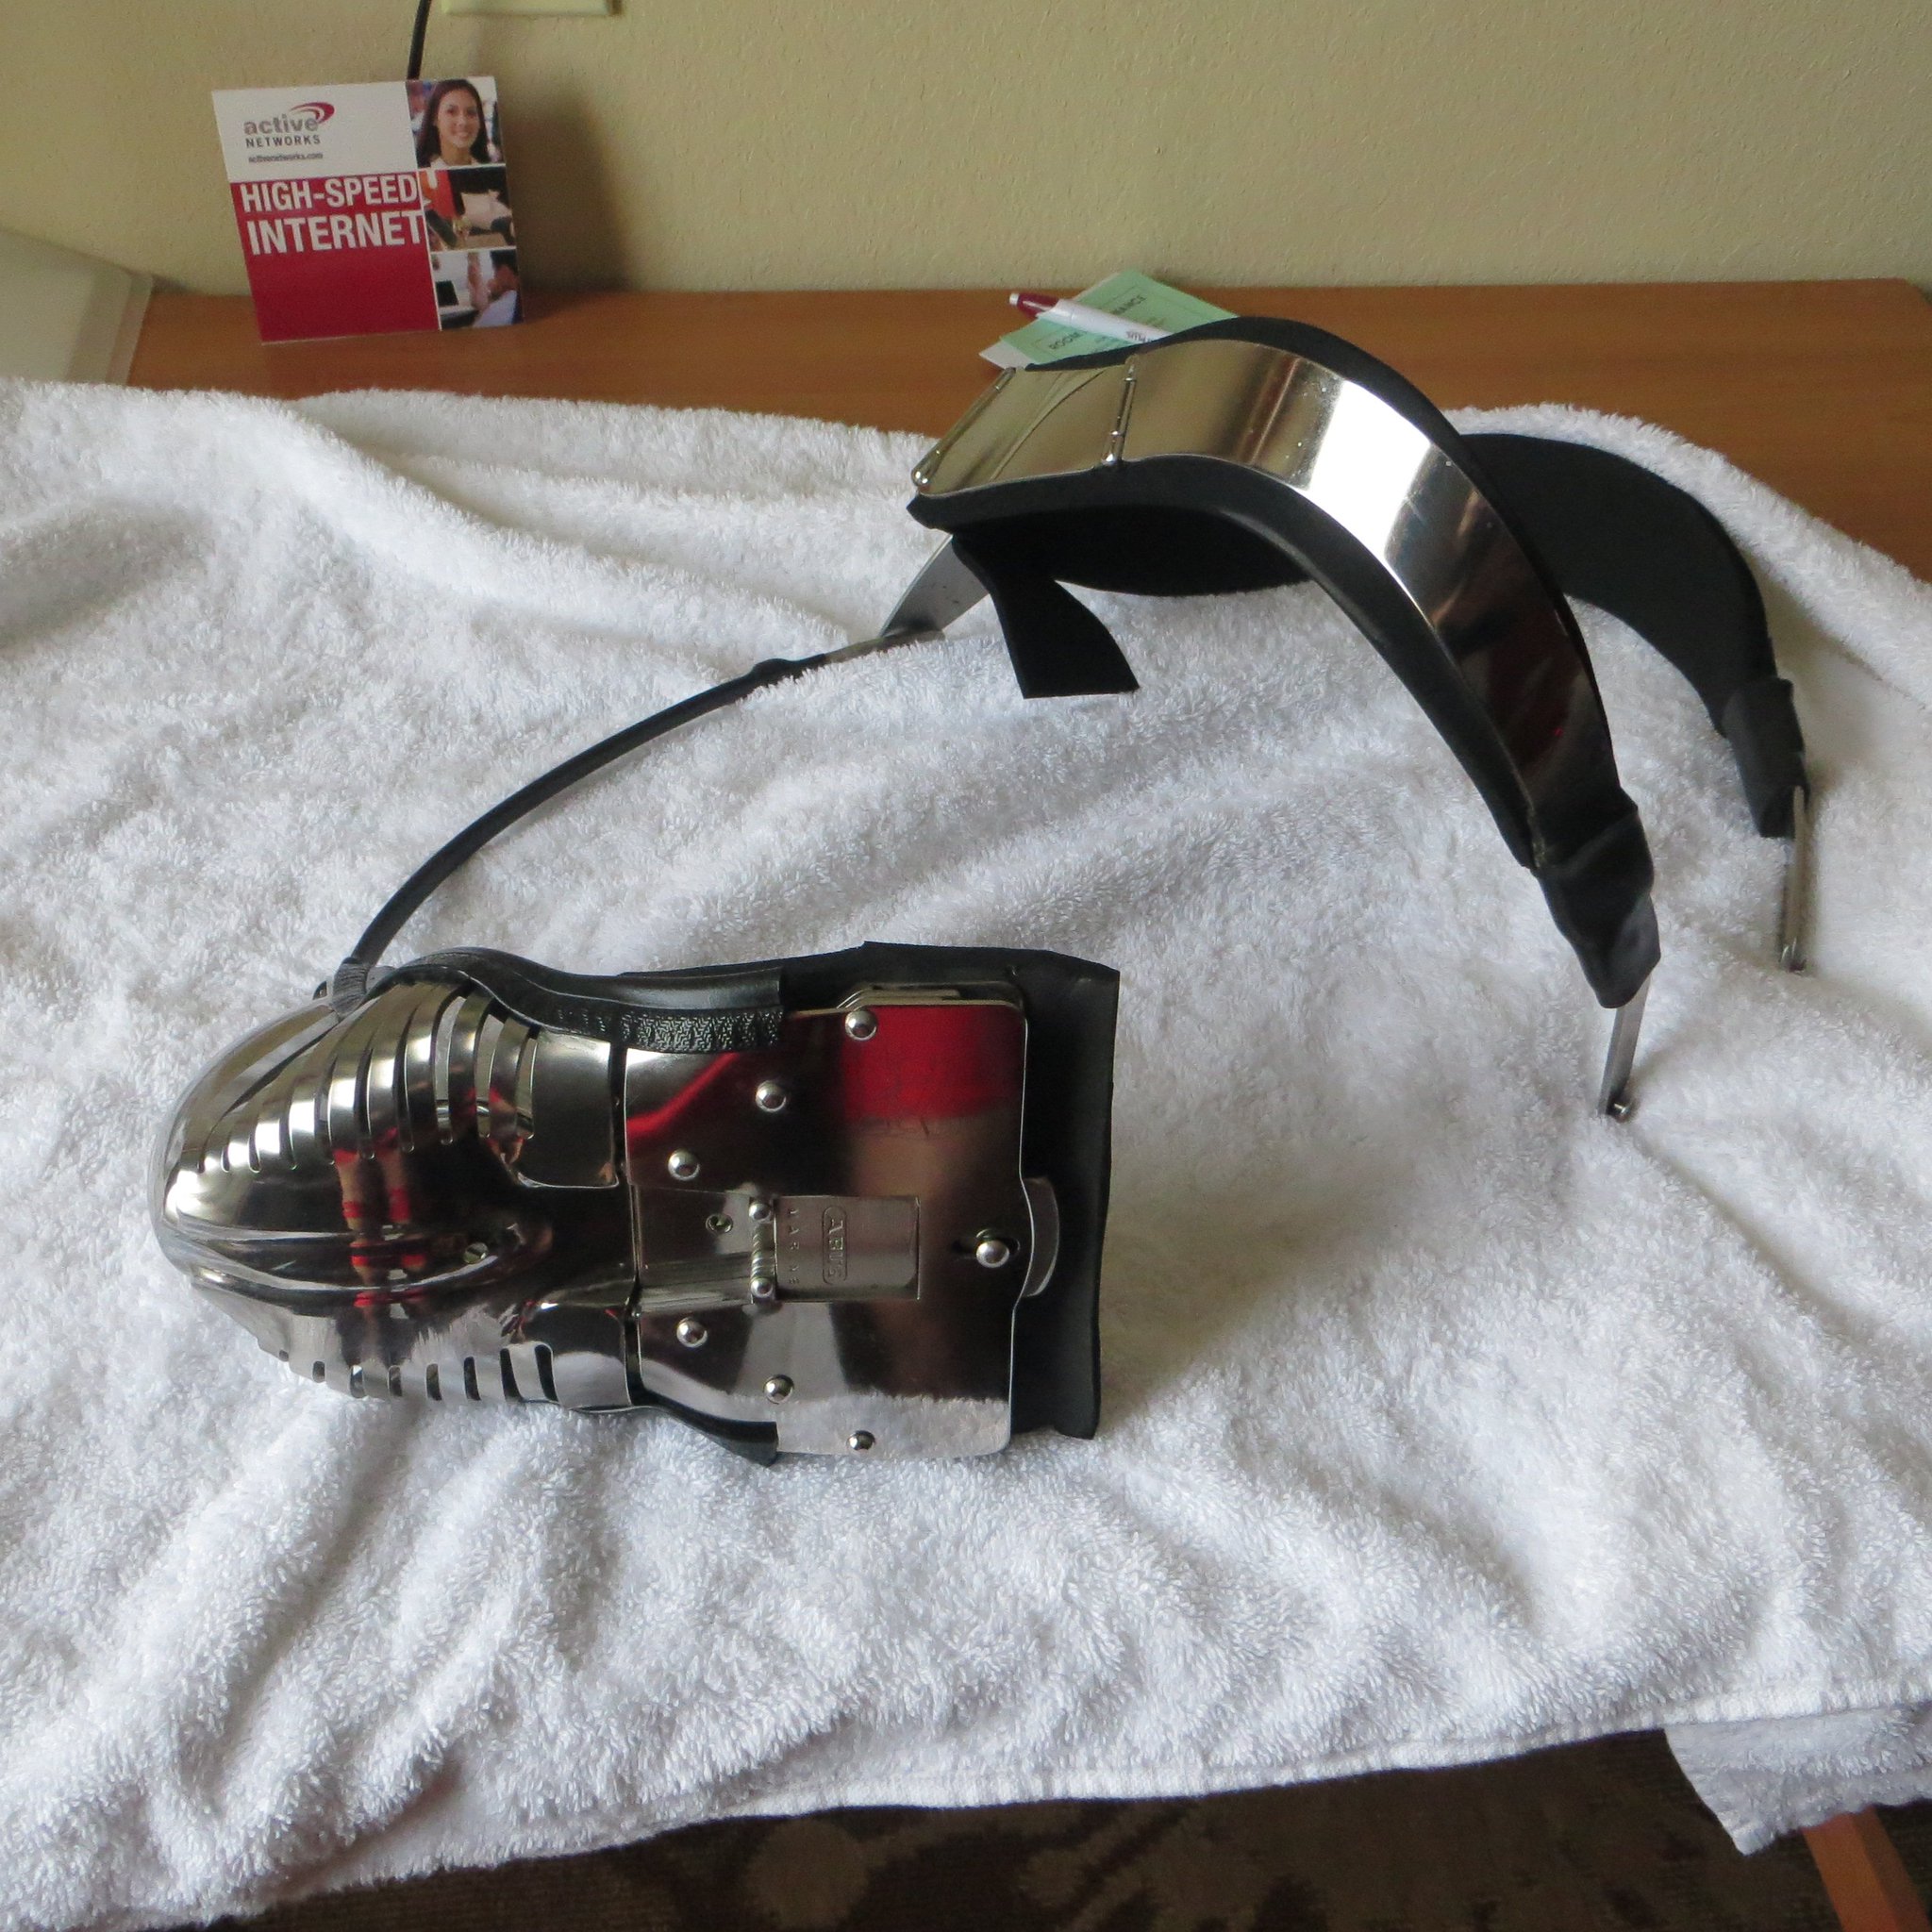 “Ordered the spikes for this @Carrara chastity belt. 